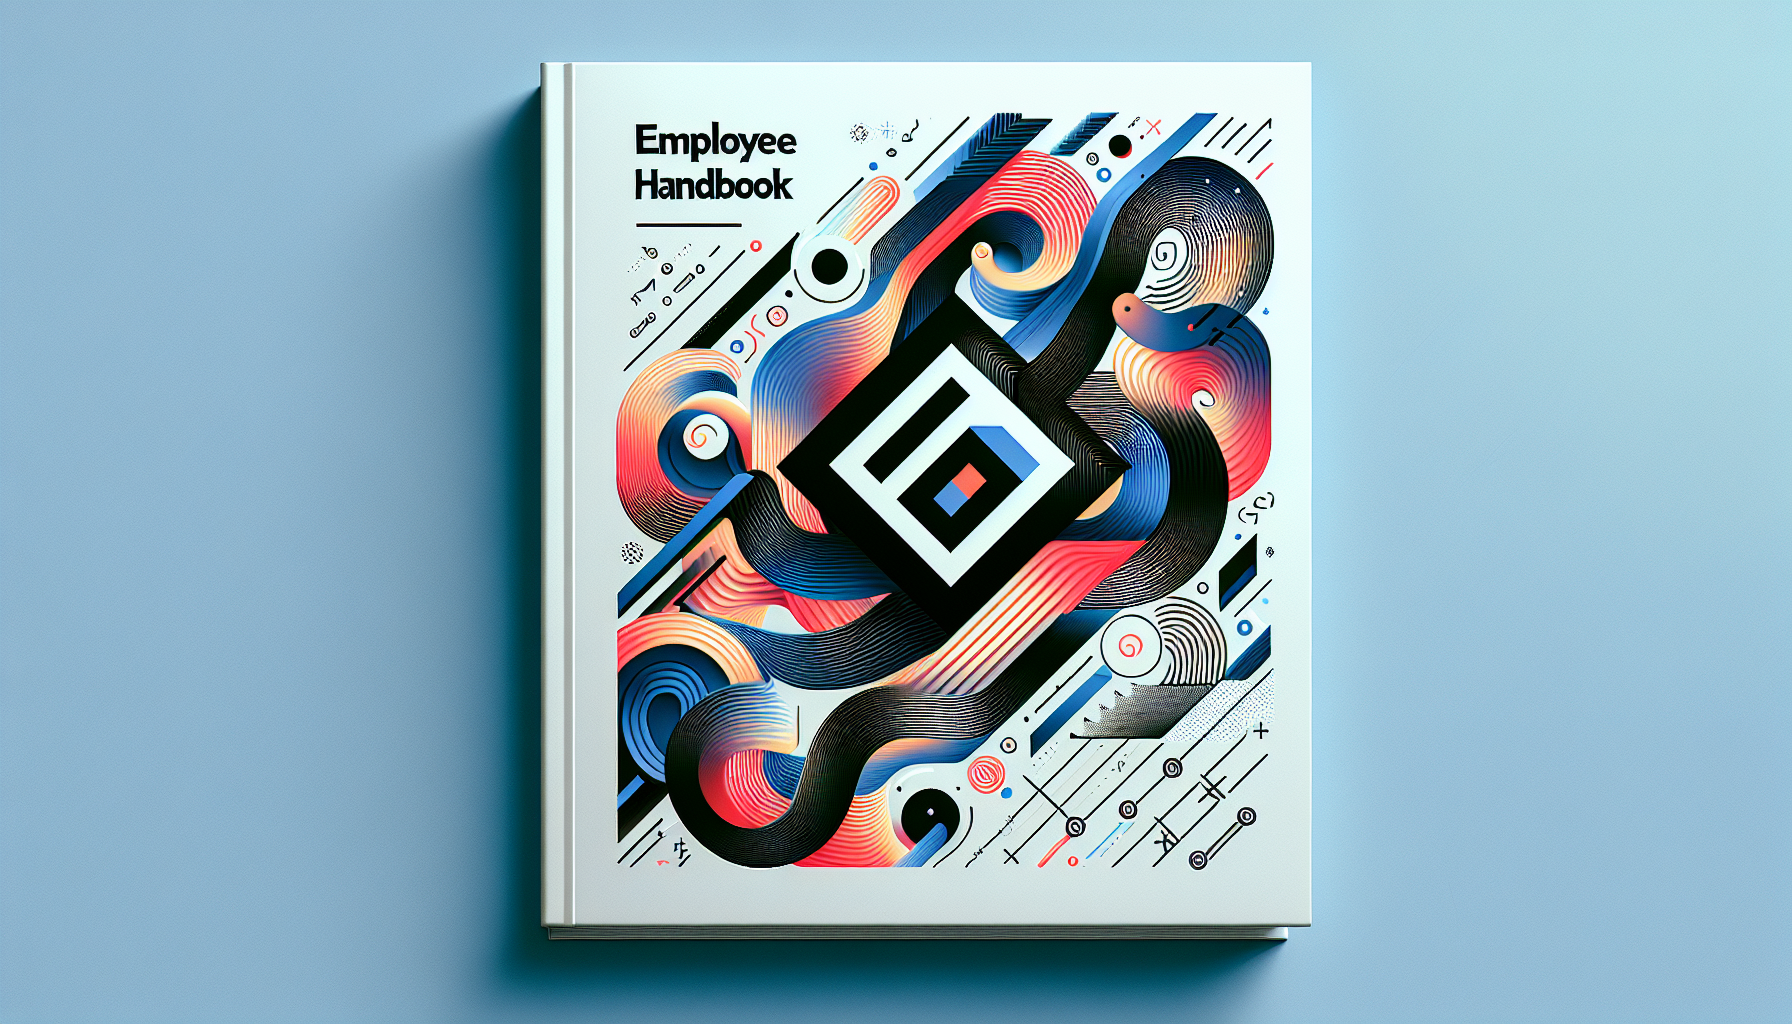 Design tips for an engaging employee handbook cover with logo usage, typography, and graphics